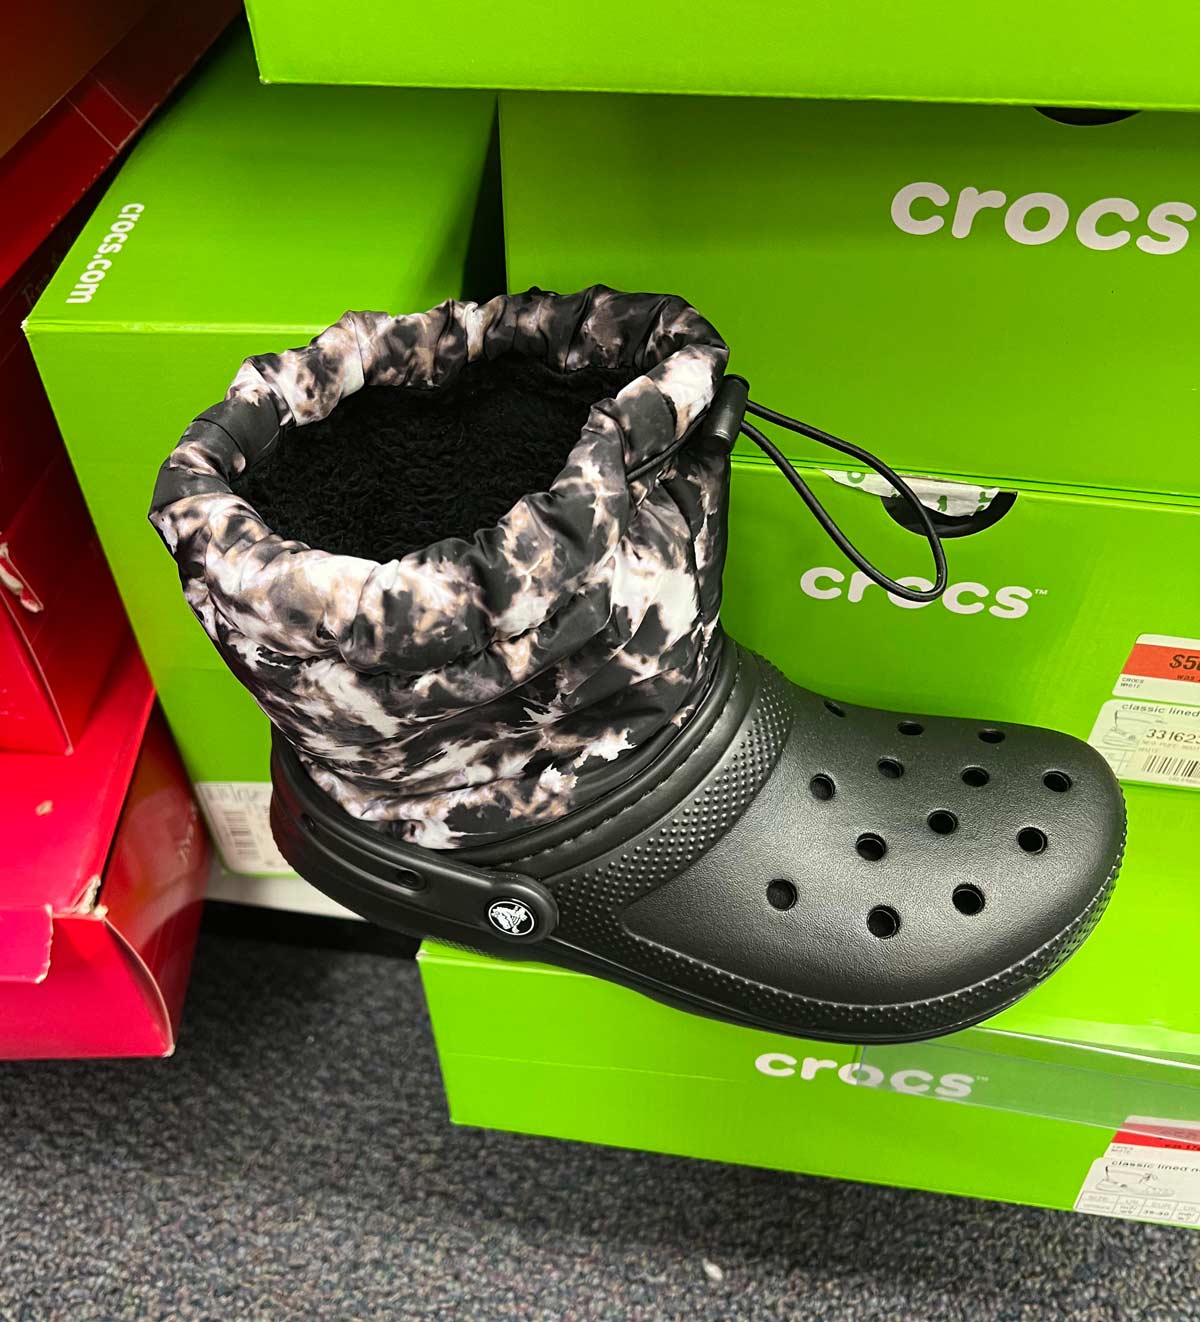 Crocs have evolved into something much much worse